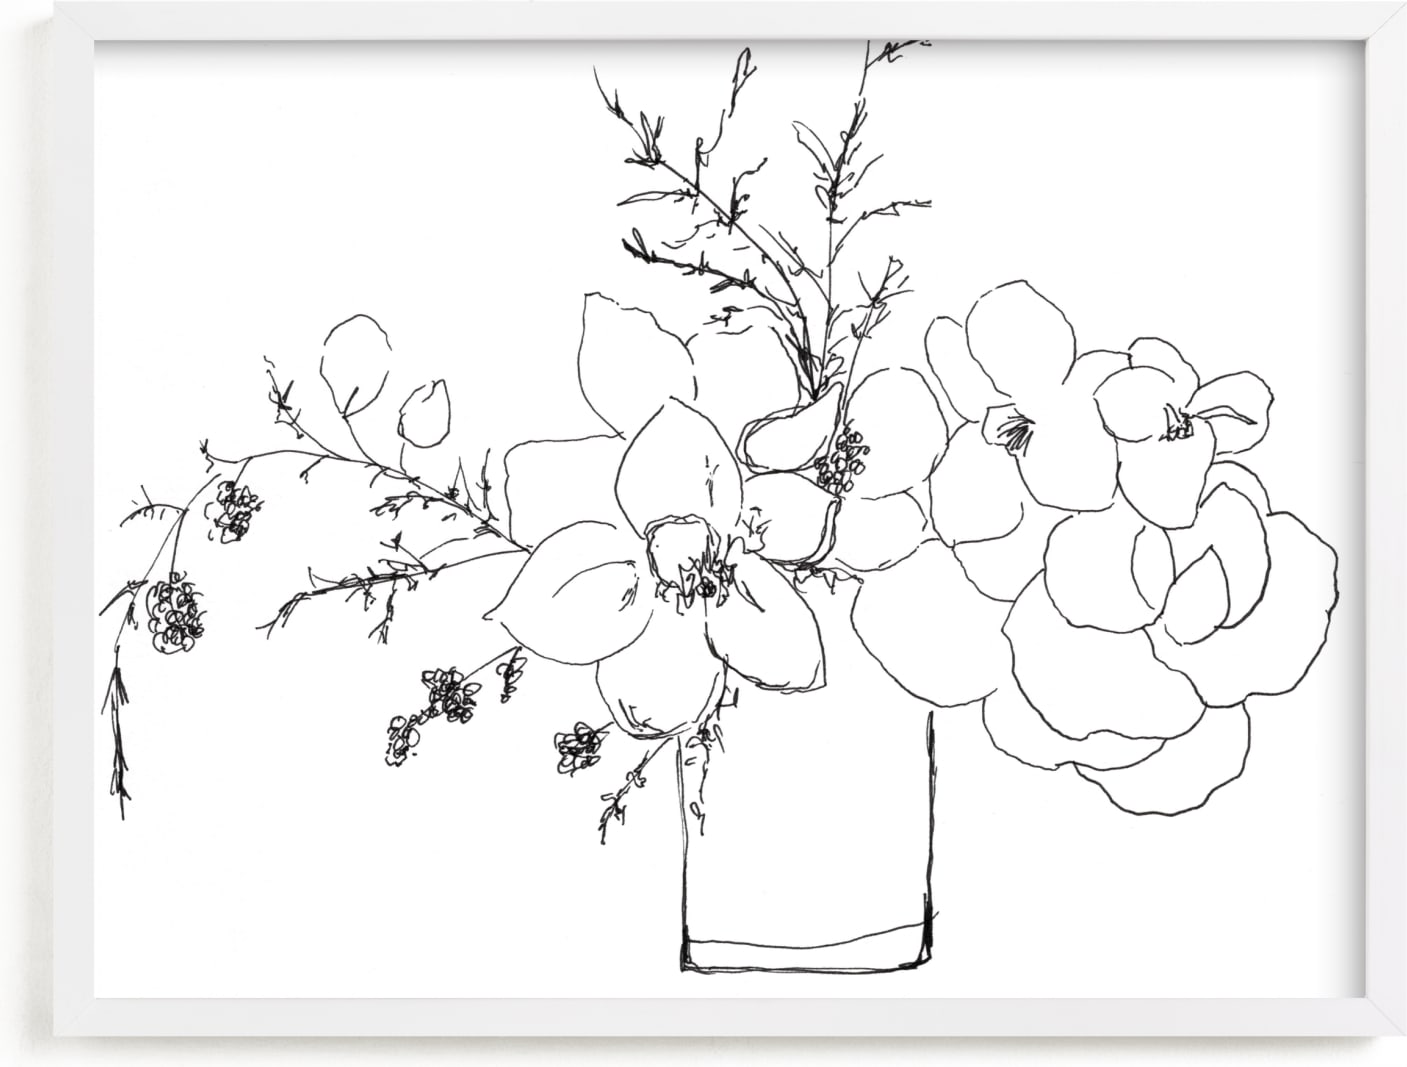 This is a black and white art by Nicole Simms called Magnolias.